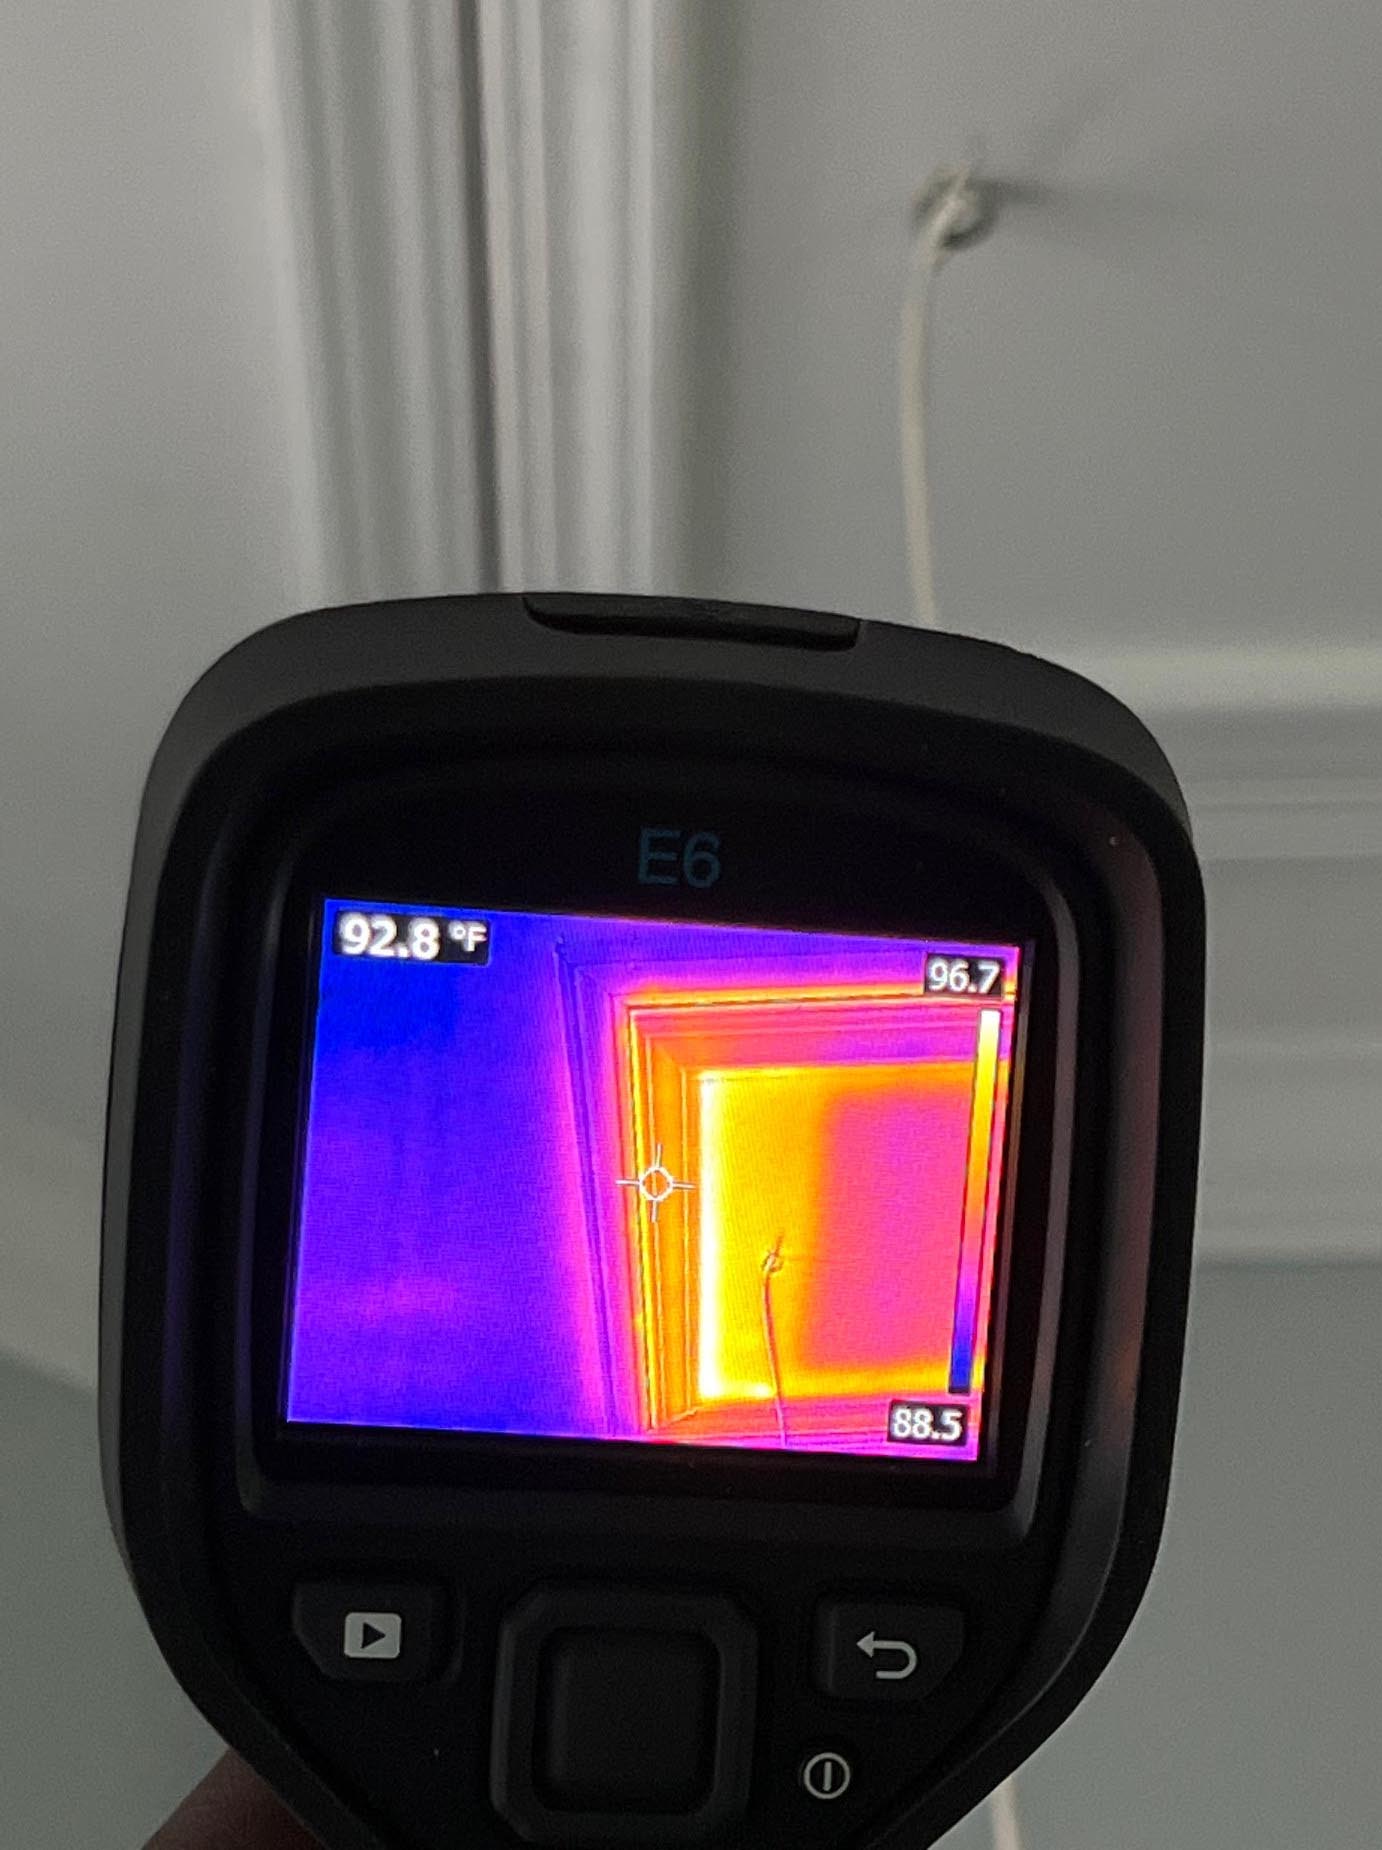 Thermal imaging services camera at work